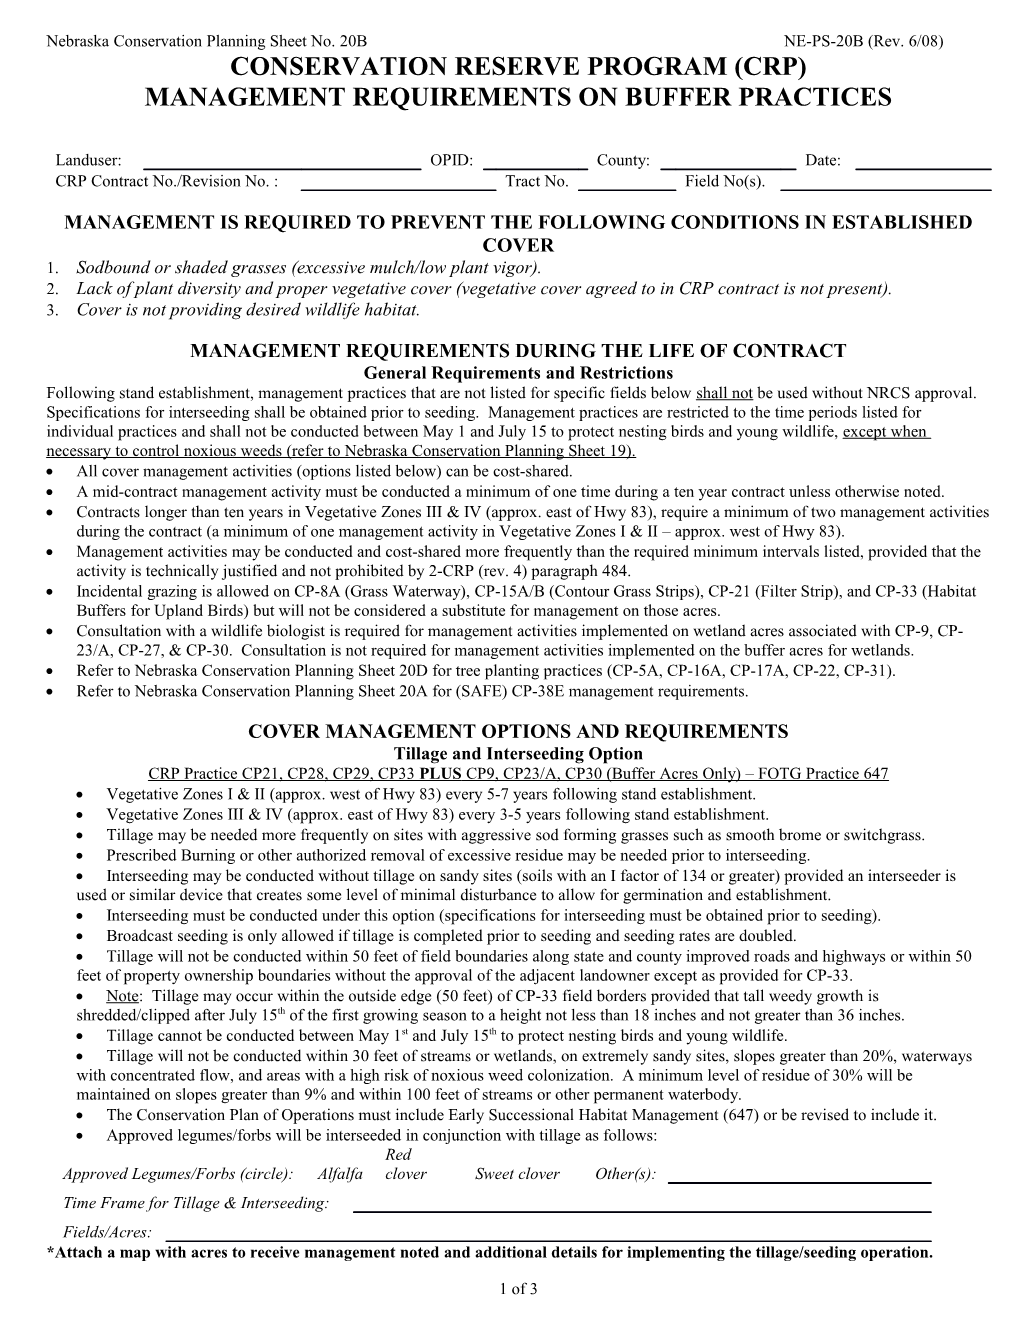 Planning Sheet 20B - CRP Management Requirements on Buffer Practices